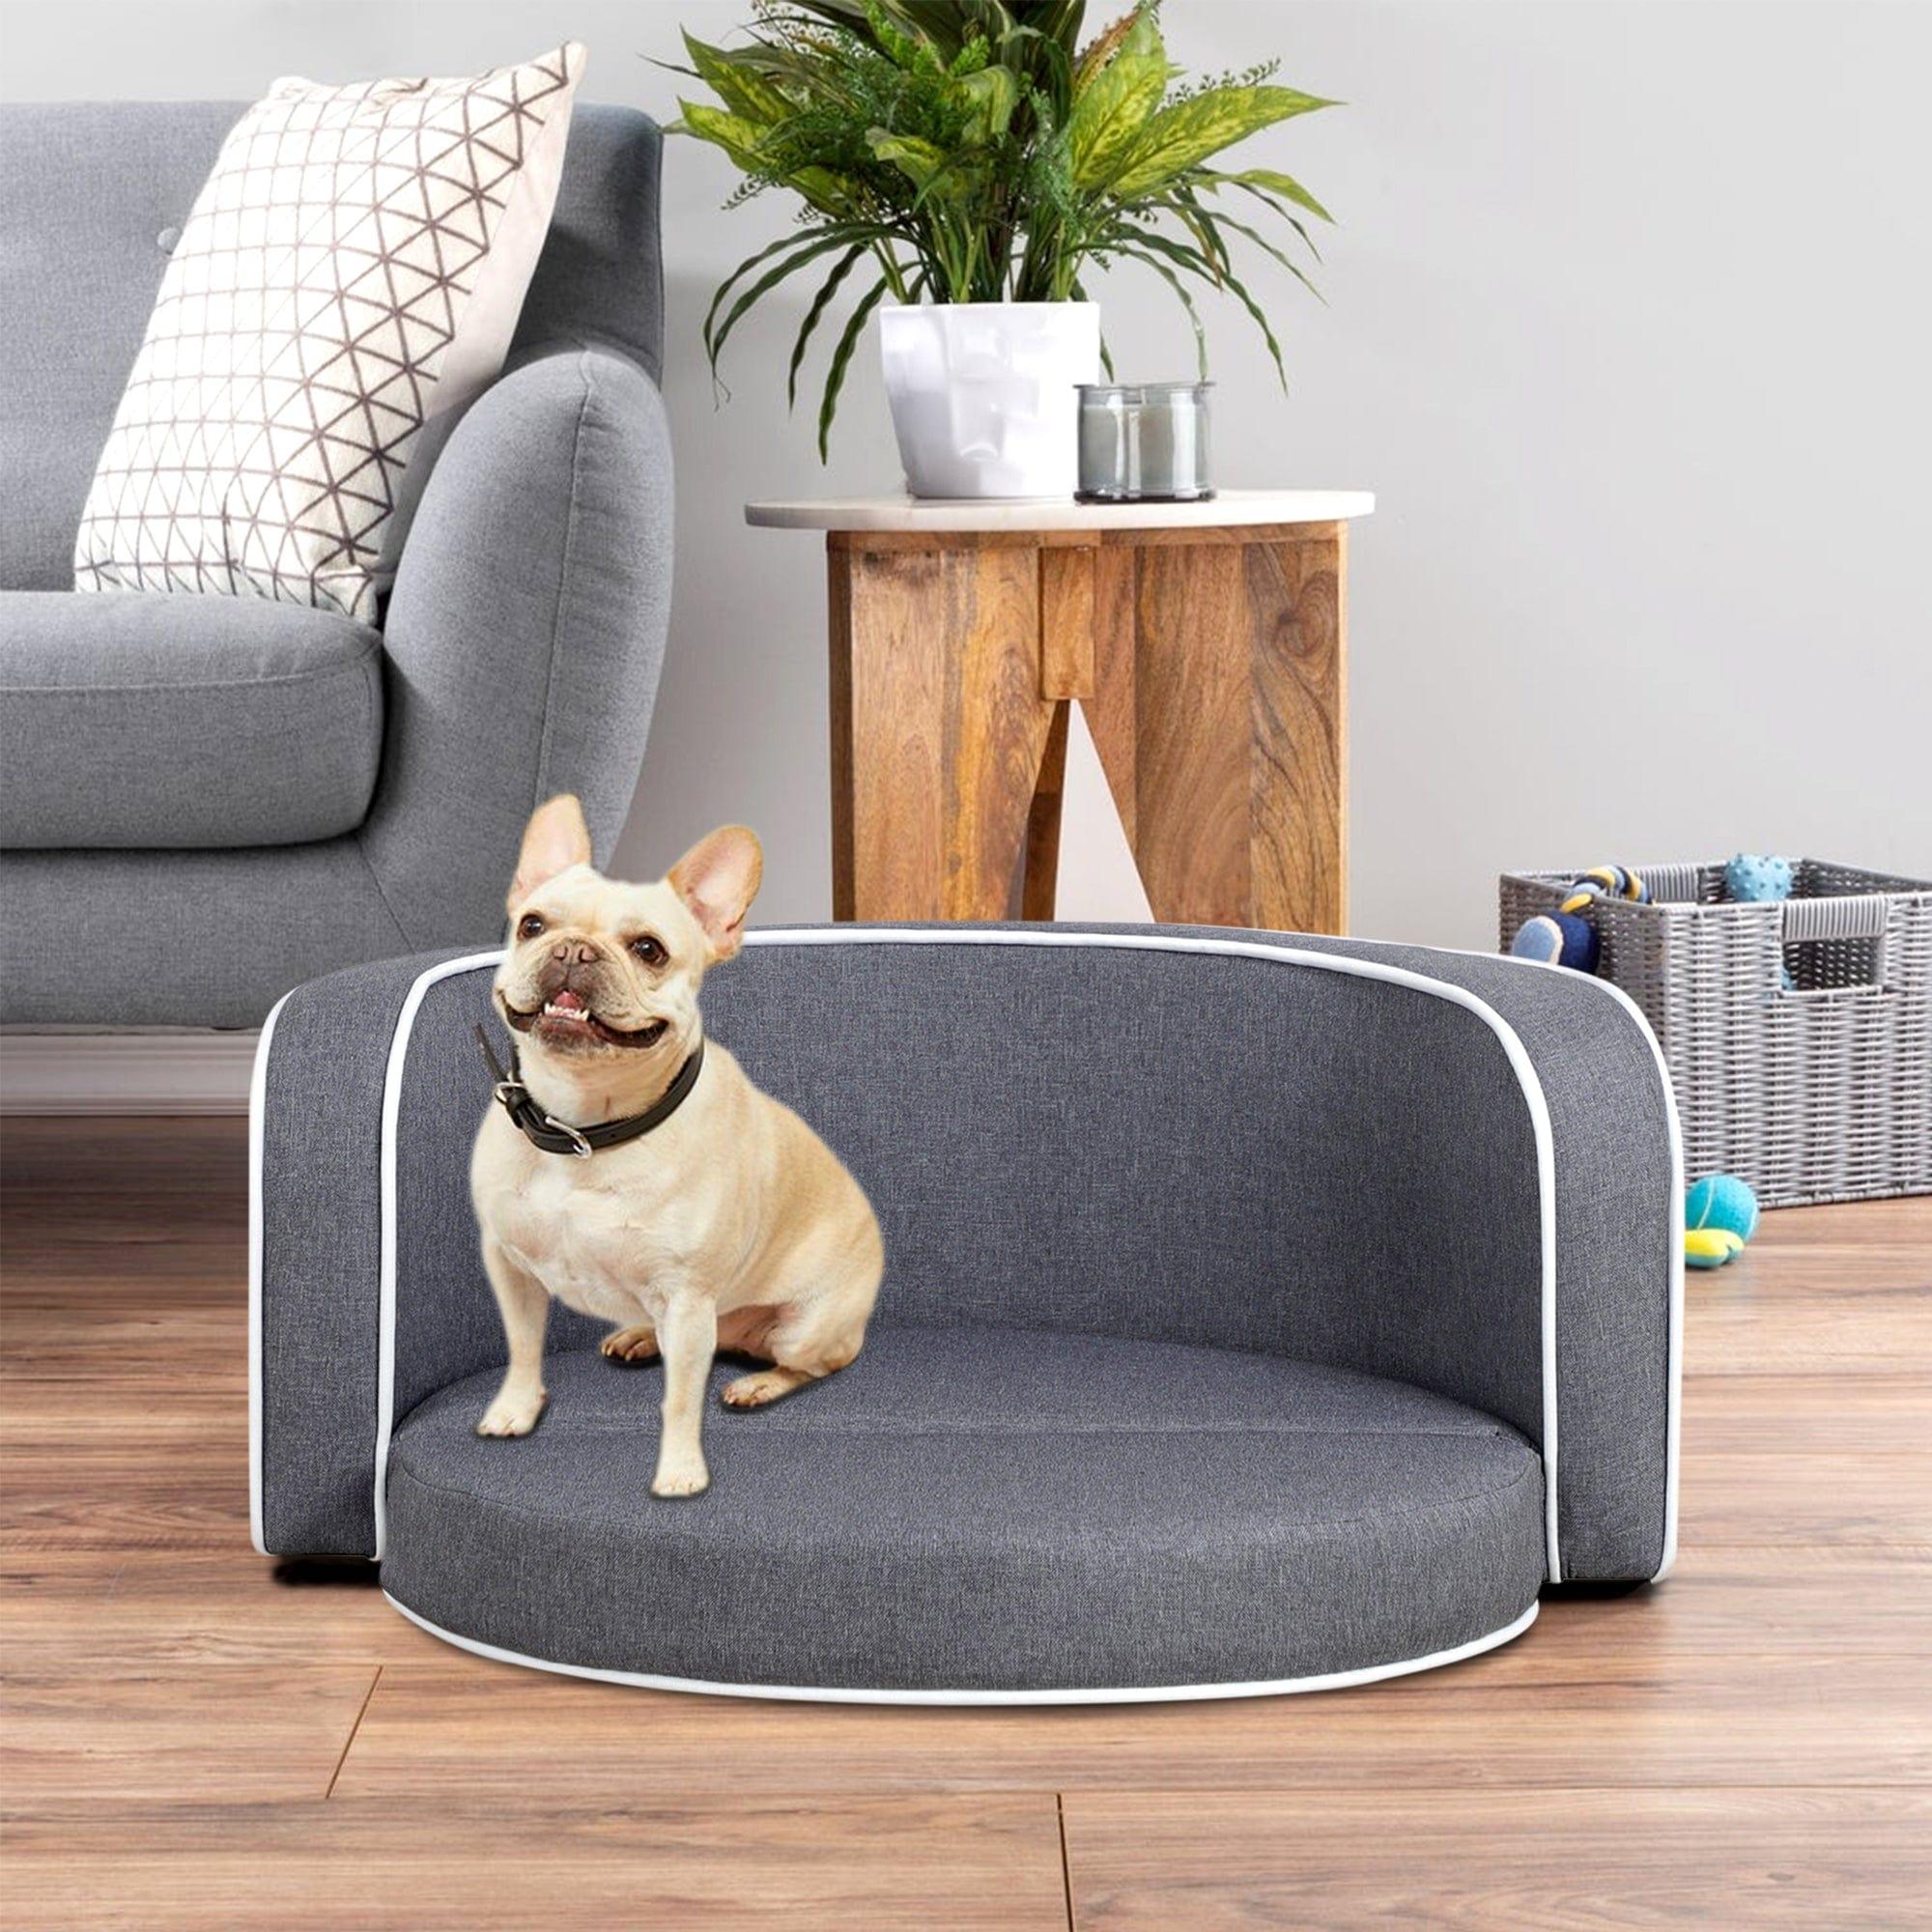 Shop 30" Gray Pet Sofa, Dog sofa, Dog bed, Cat Bed, Cat Sofa, with Wooden Structure and Linen Goods White Roller Lines on the Edges Curved Appearance pet Sofa with Cushion Mademoiselle Home Decor